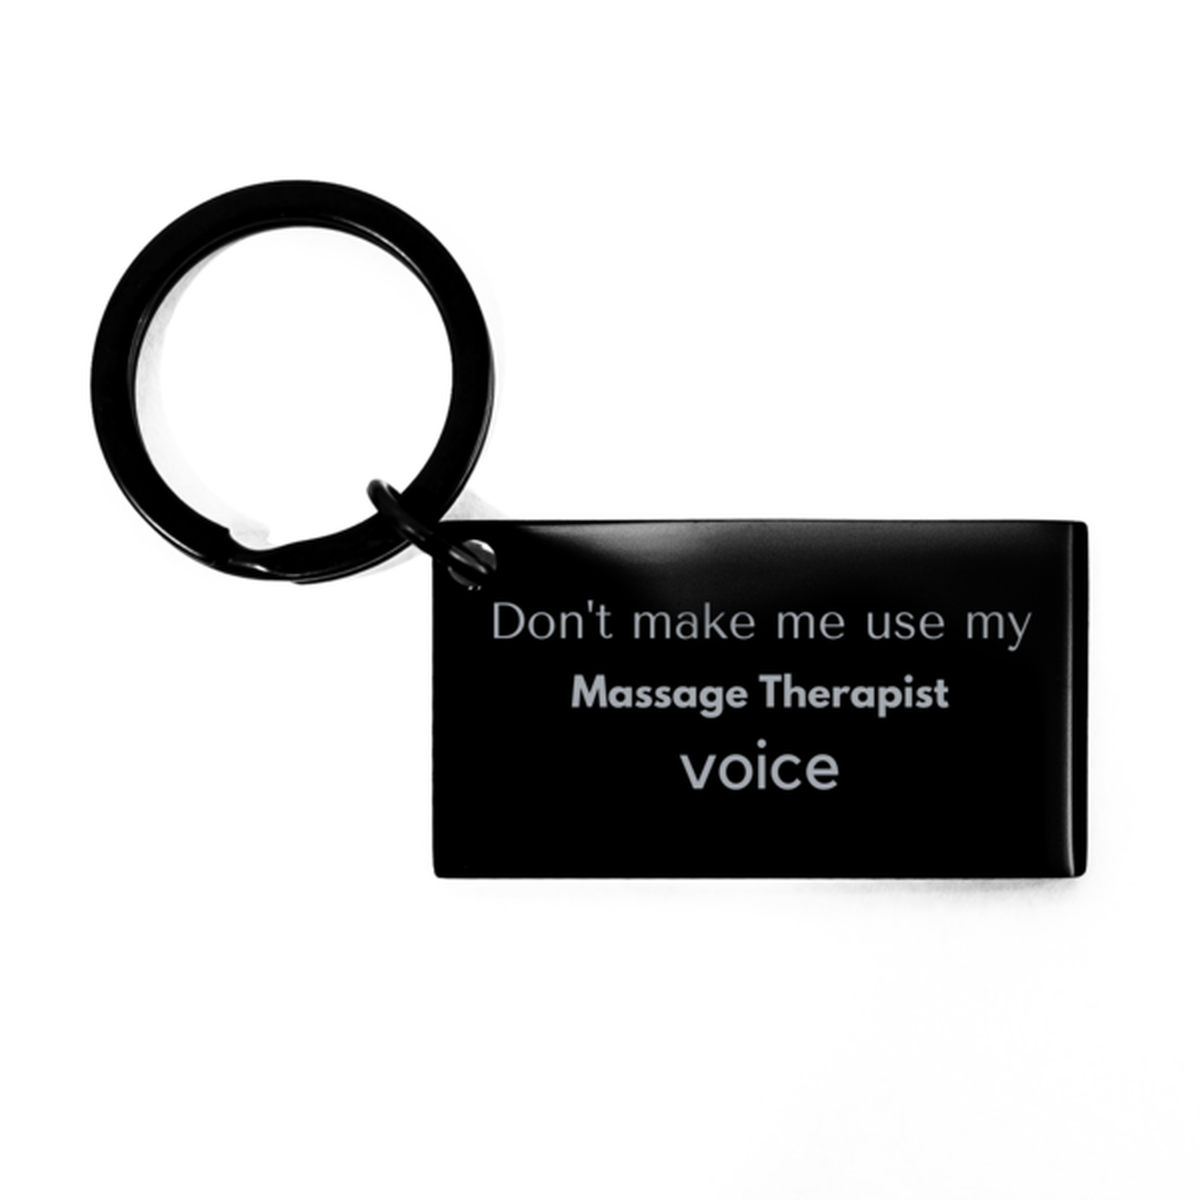 Don't make me use my Massage Therapist voice, Sarcasm Massage Therapist Gifts, Christmas Massage Therapist Keychain Birthday Unique Gifts For Massage Therapist Coworkers, Men, Women, Colleague, Friends